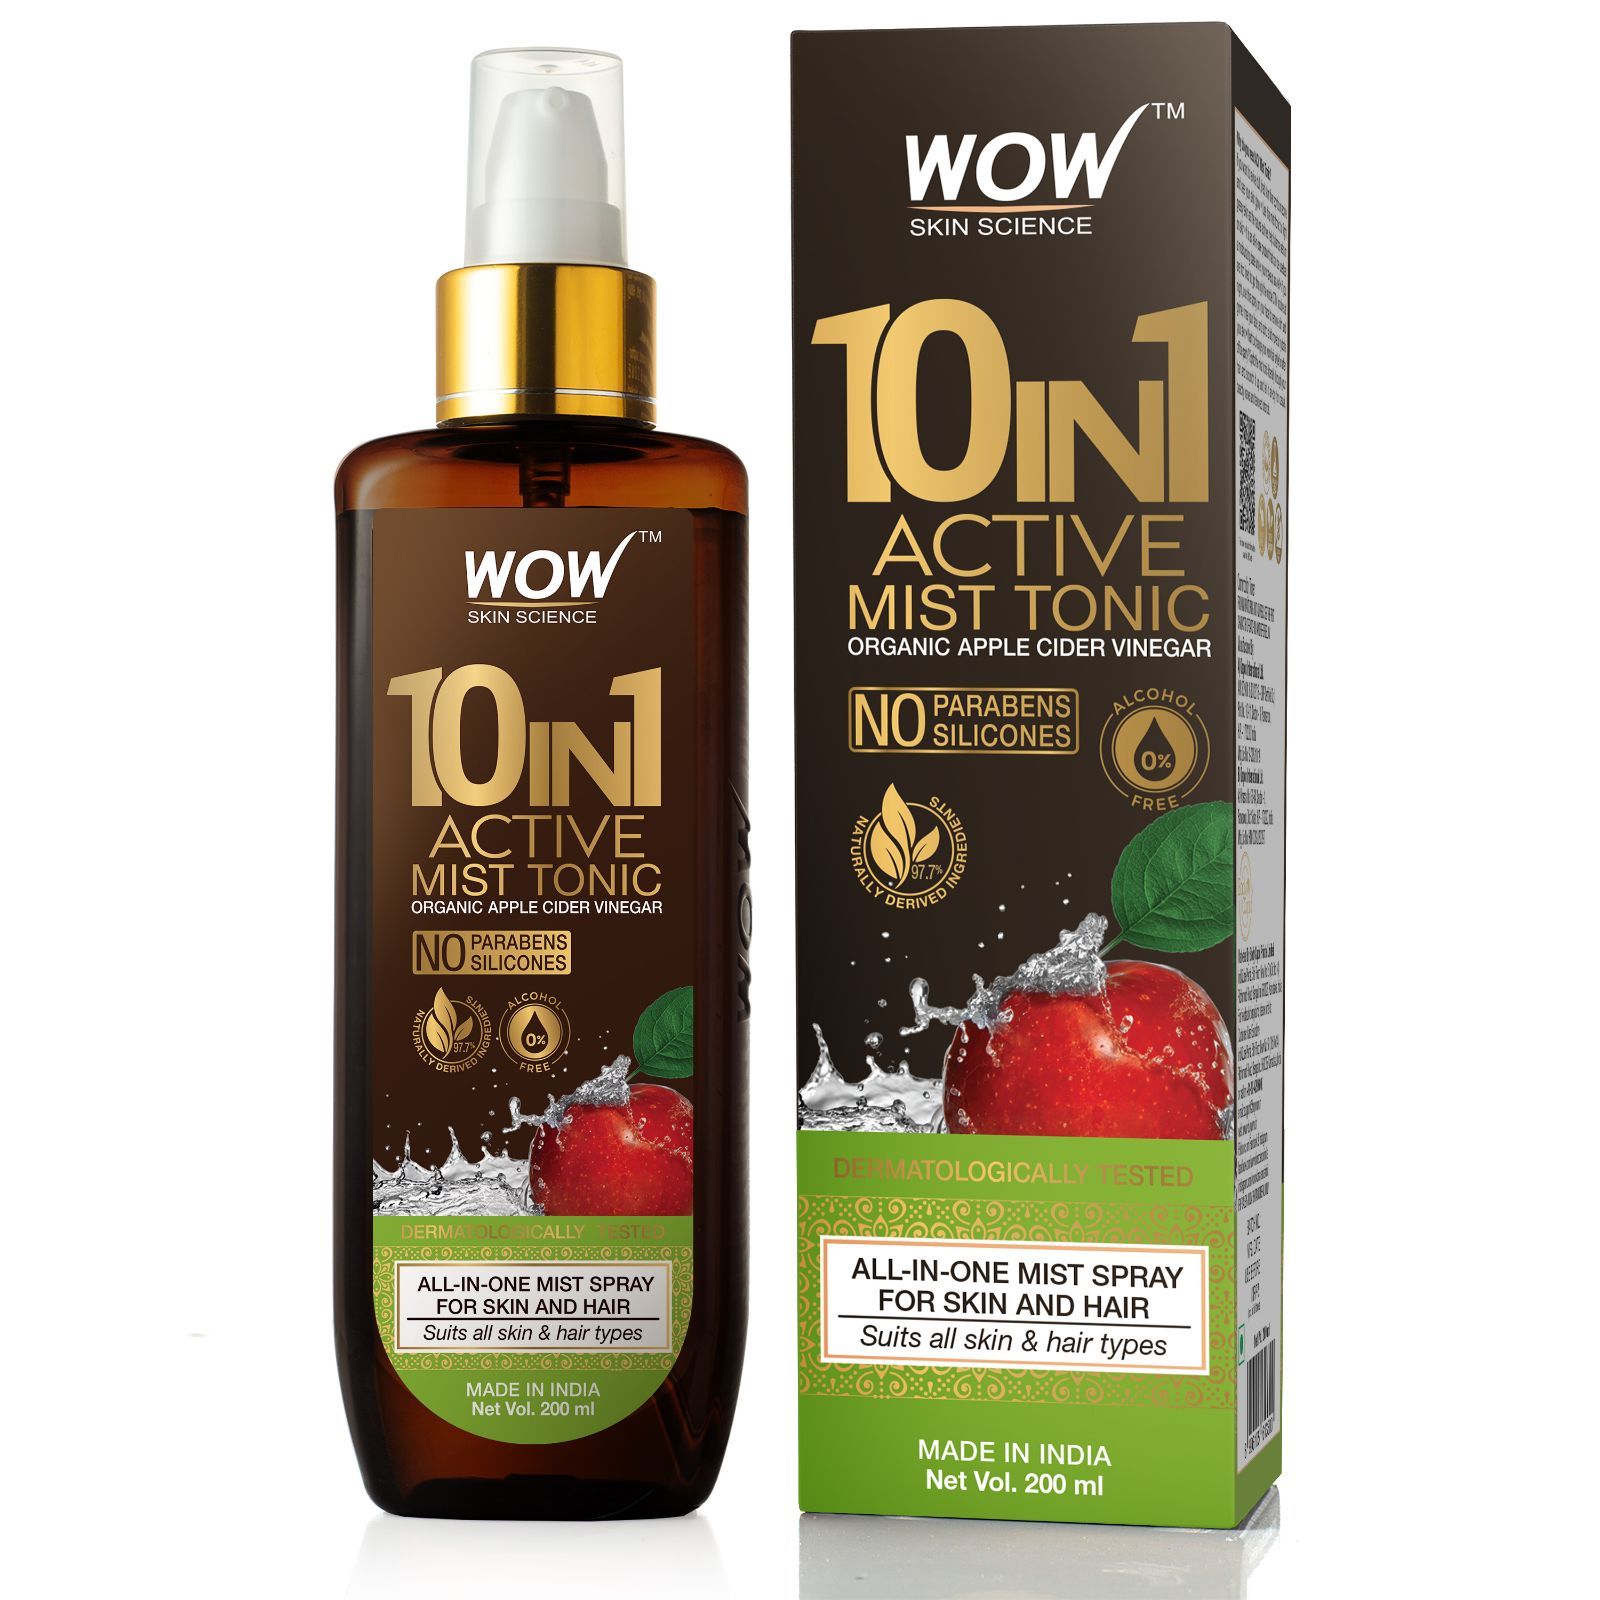 WOW Skin Science 10-In-1 Active Mist Tonic Organic Apple Cider Vinegar: Buy  WOW Skin Science 10-In-1 Active Mist Tonic Organic Apple Cider Vinegar  Online at Best Price in India | Nykaa